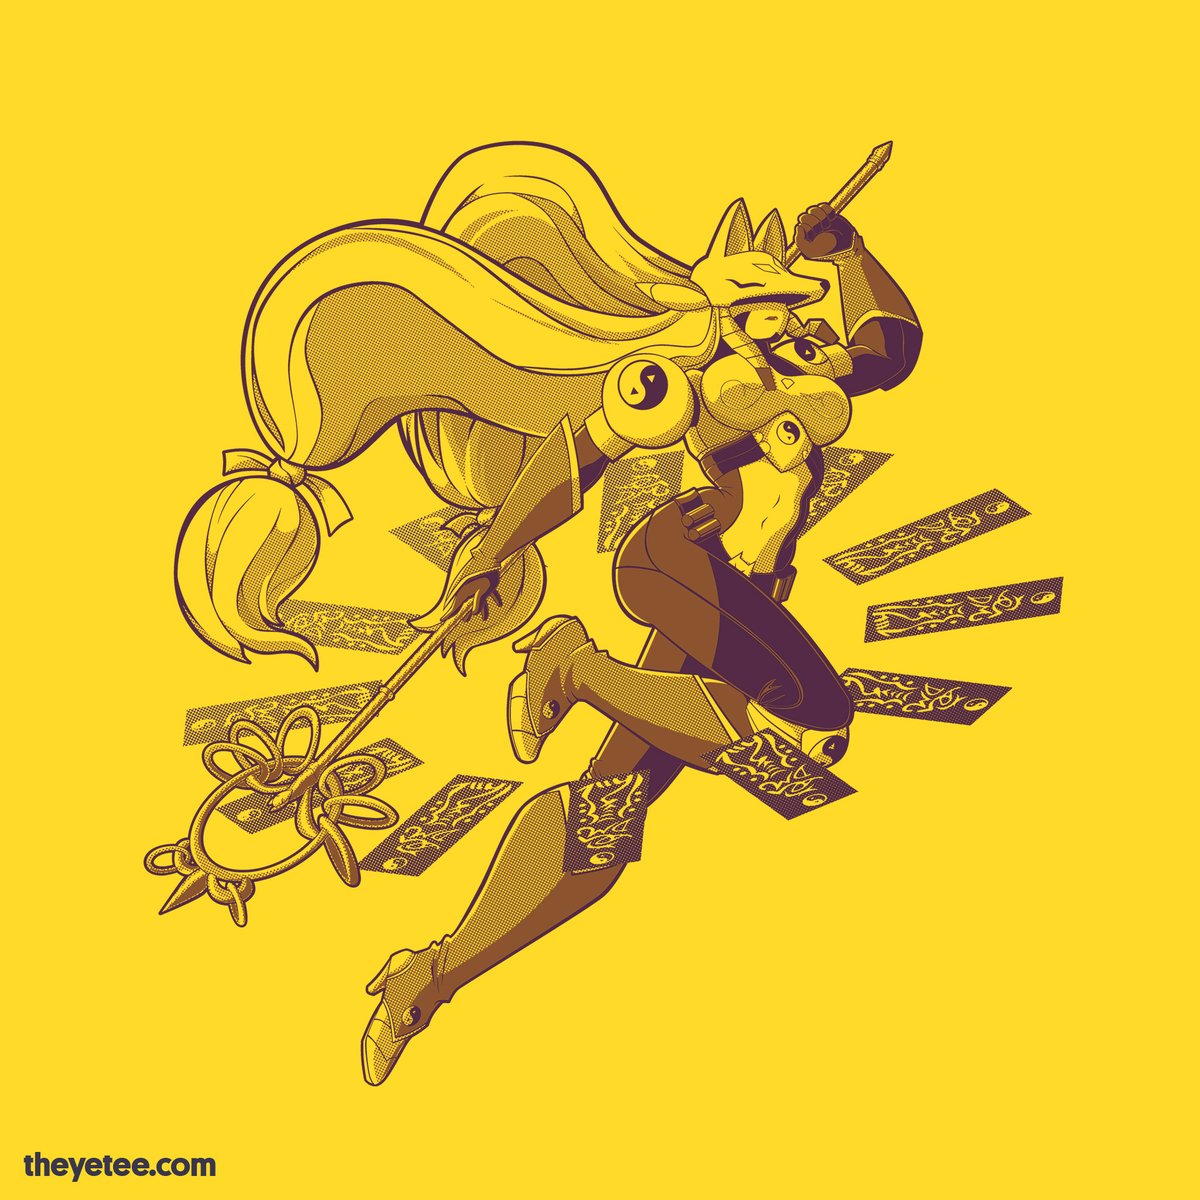 「Your luck has just run out! Designed by 」|The Yetee 🌈のイラスト